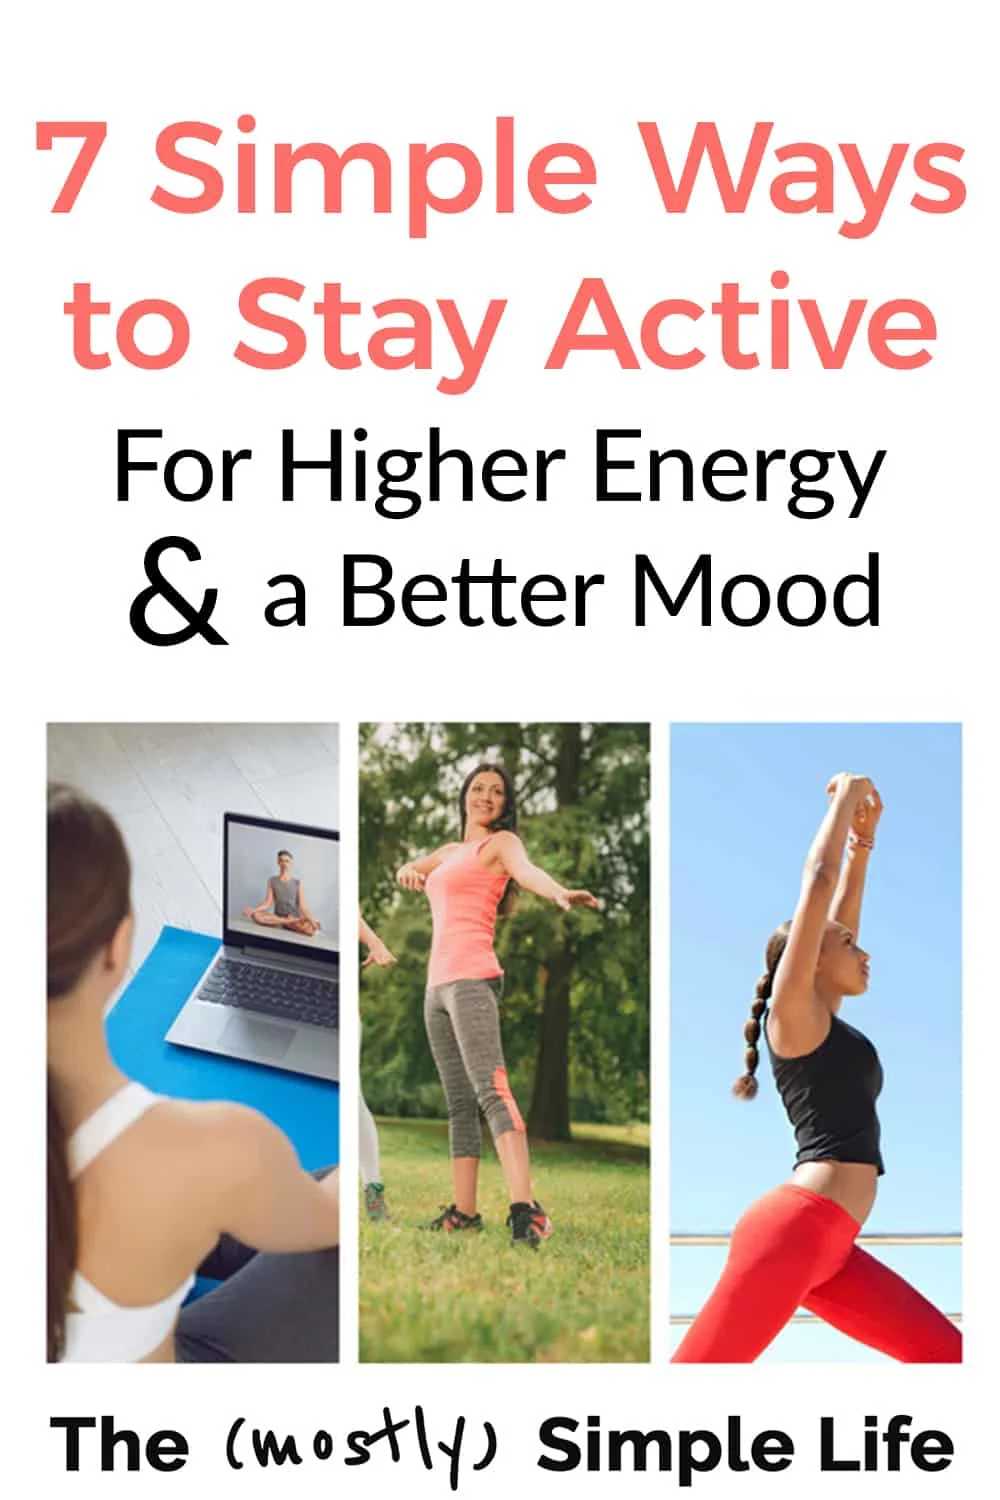 7 Simple Ways to Stay Active to Improve Your Mood & Increase Happiness